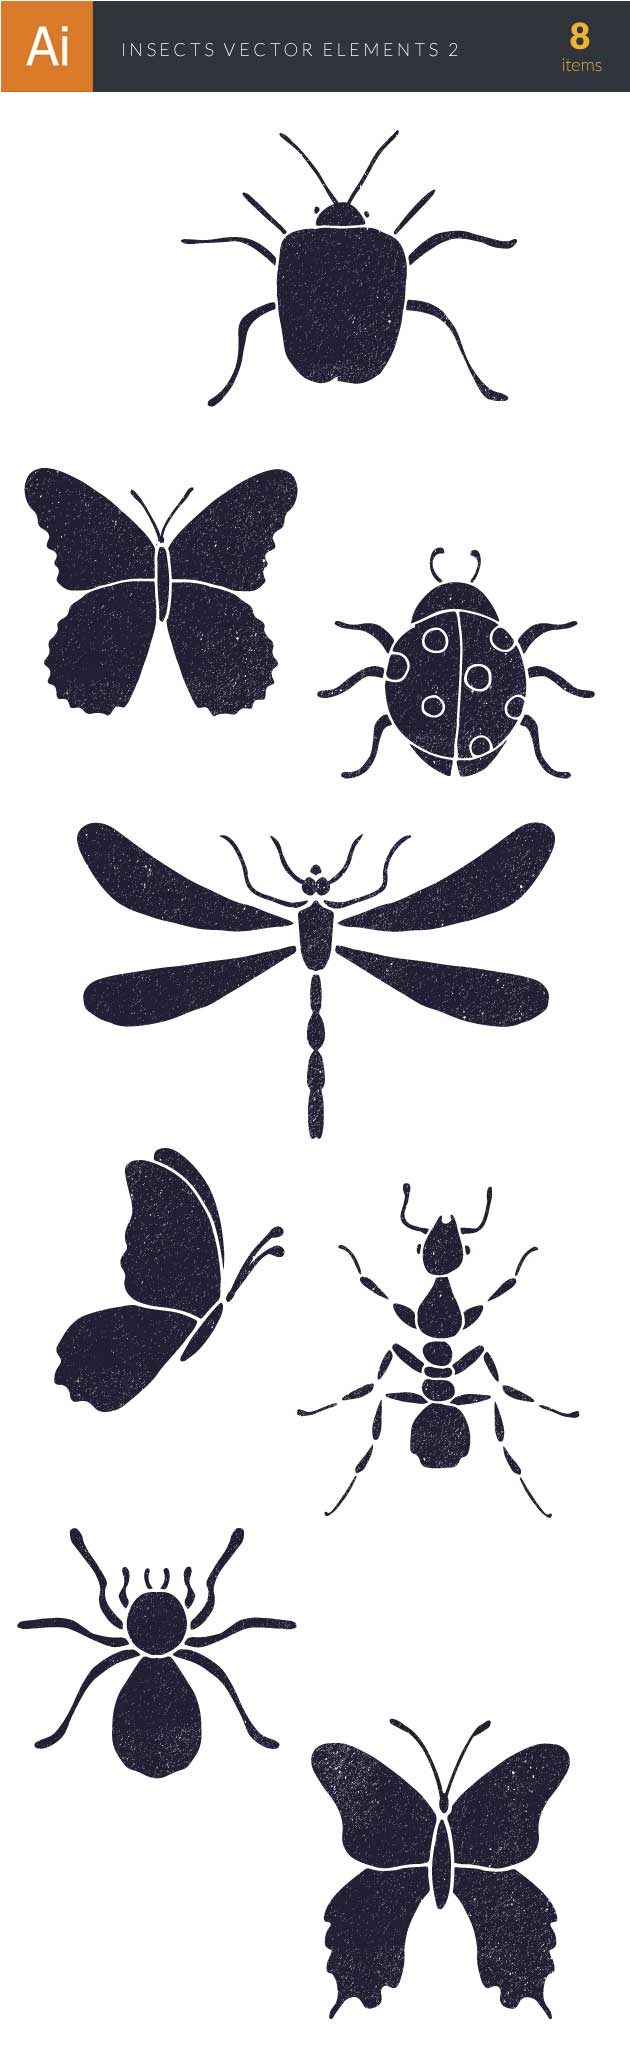 Insects Vector Elements Set 2 2